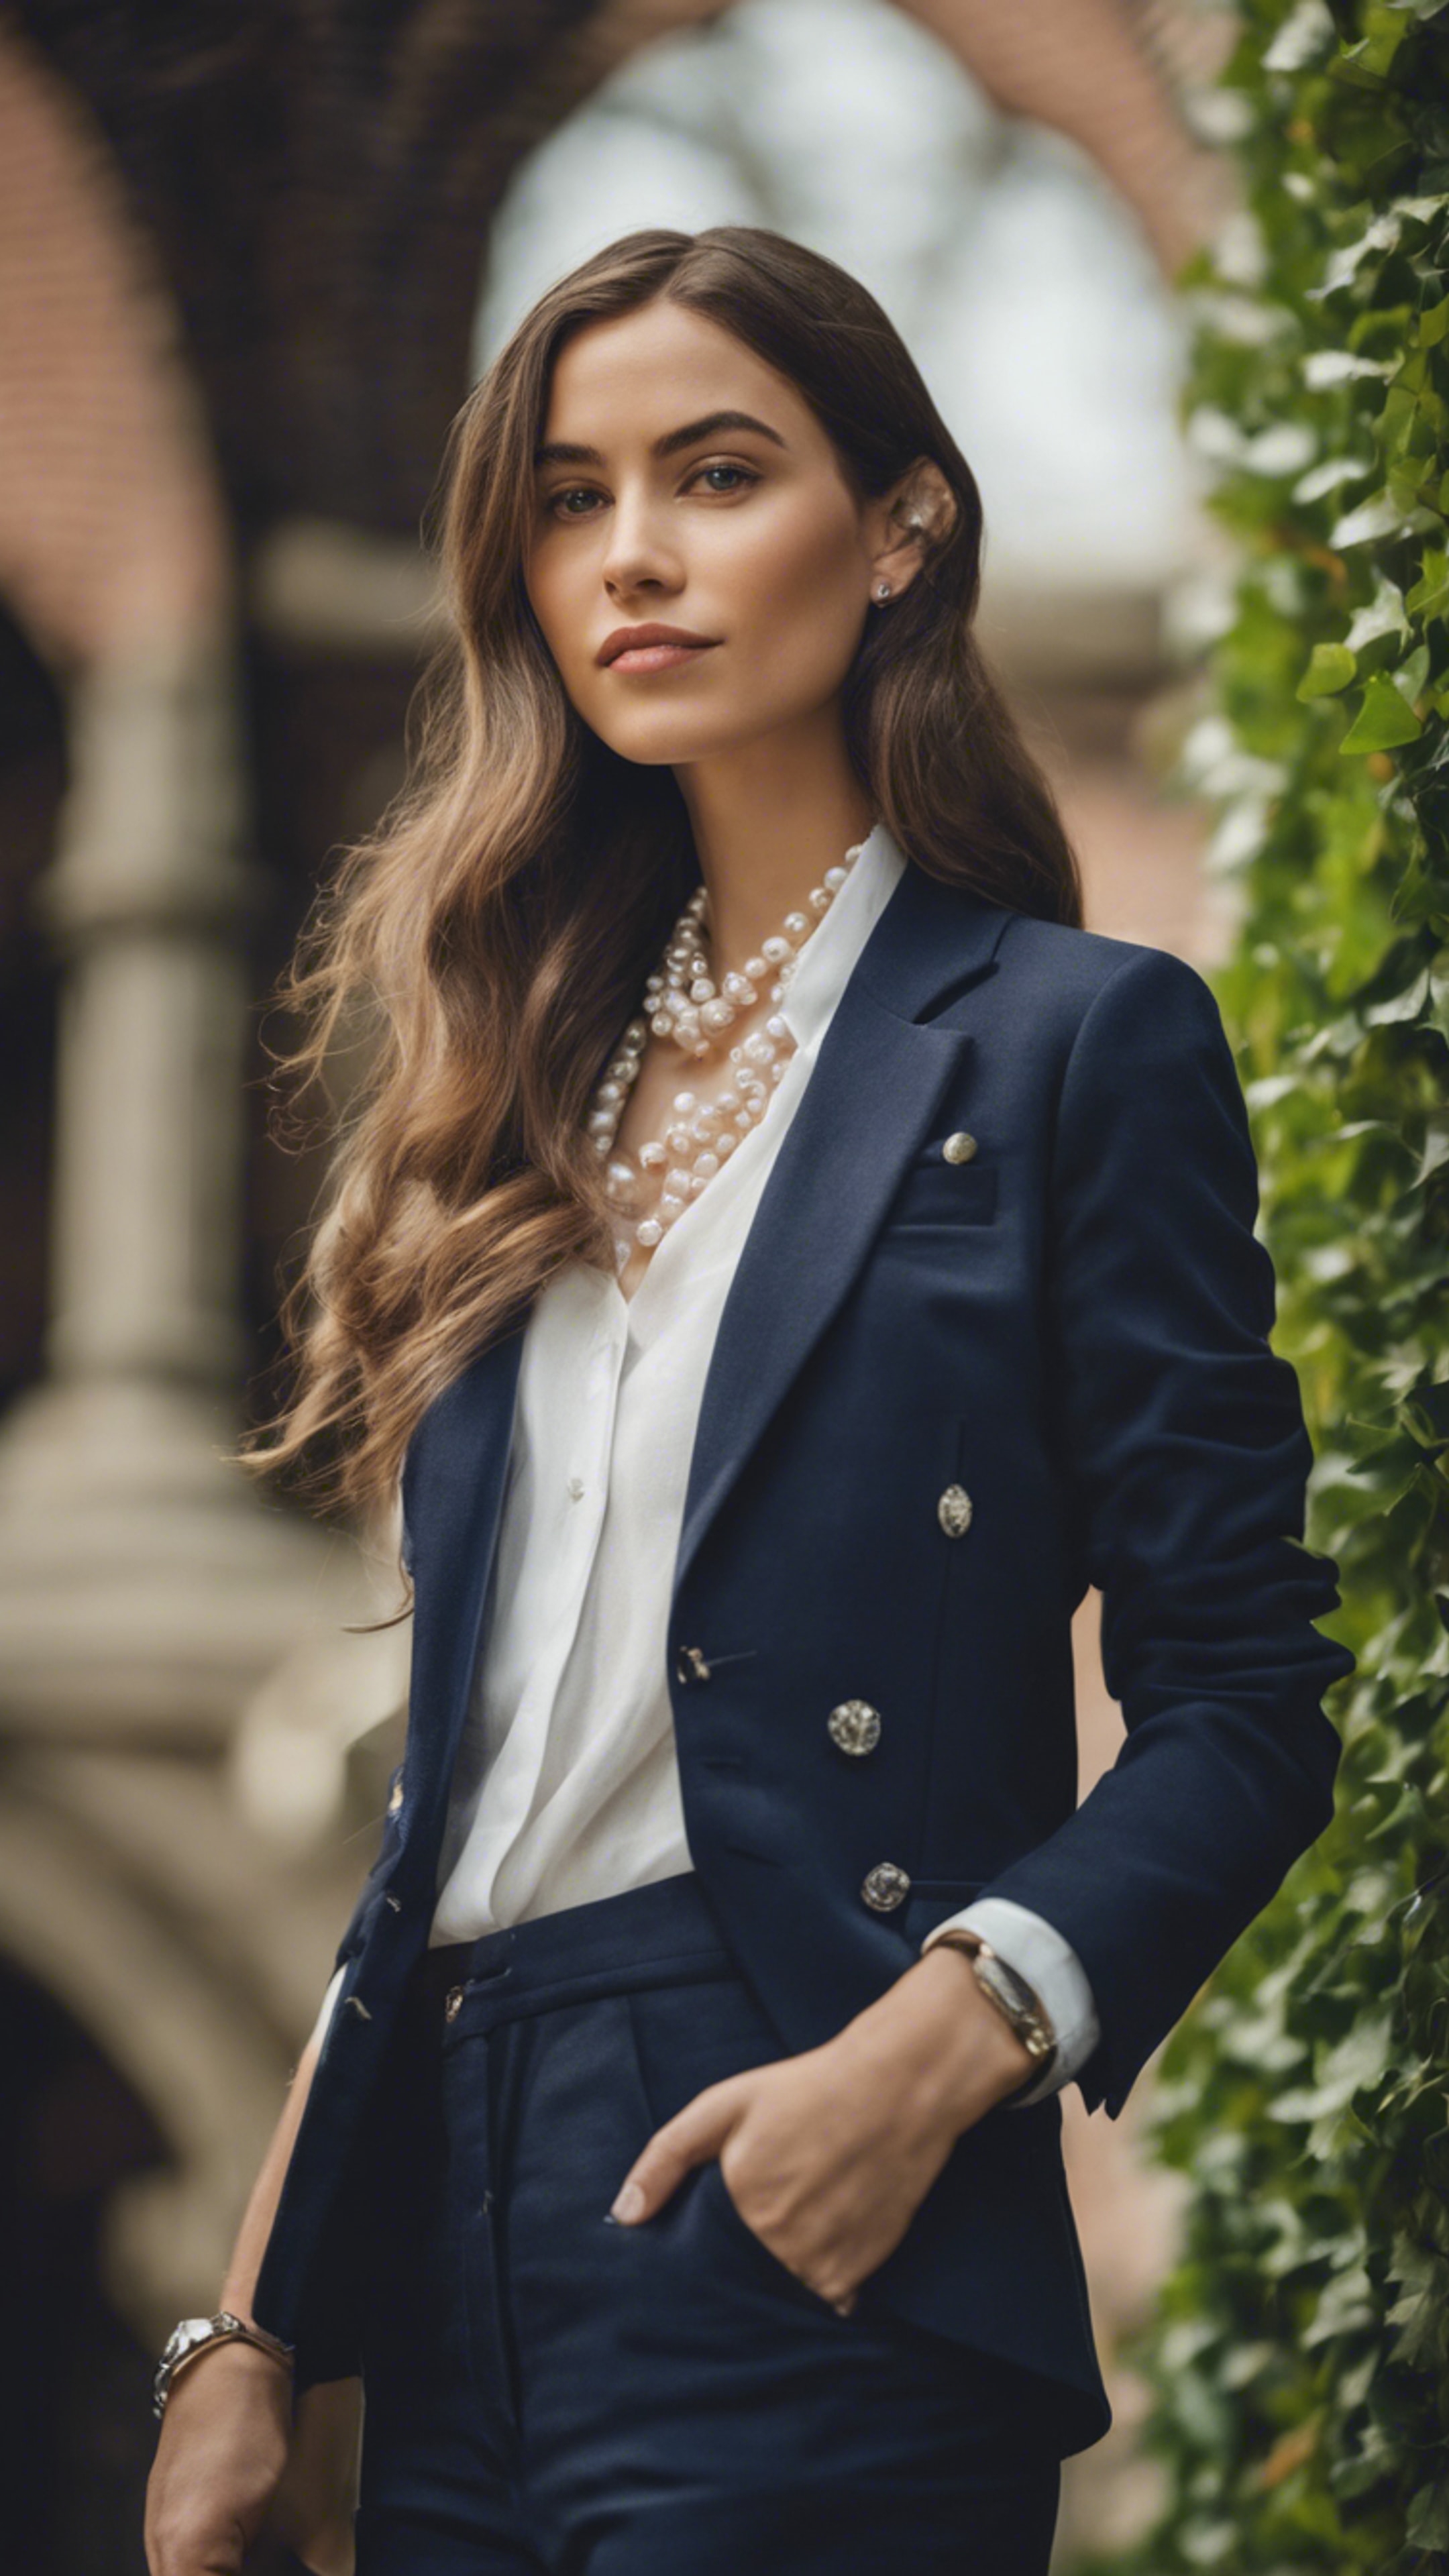 A portrait of a preppy woman in a navy blue blazer, pearl necklace, and a white linen shirt, posing in an Ivy League campus.壁紙[1775f808339c45cb81cf]